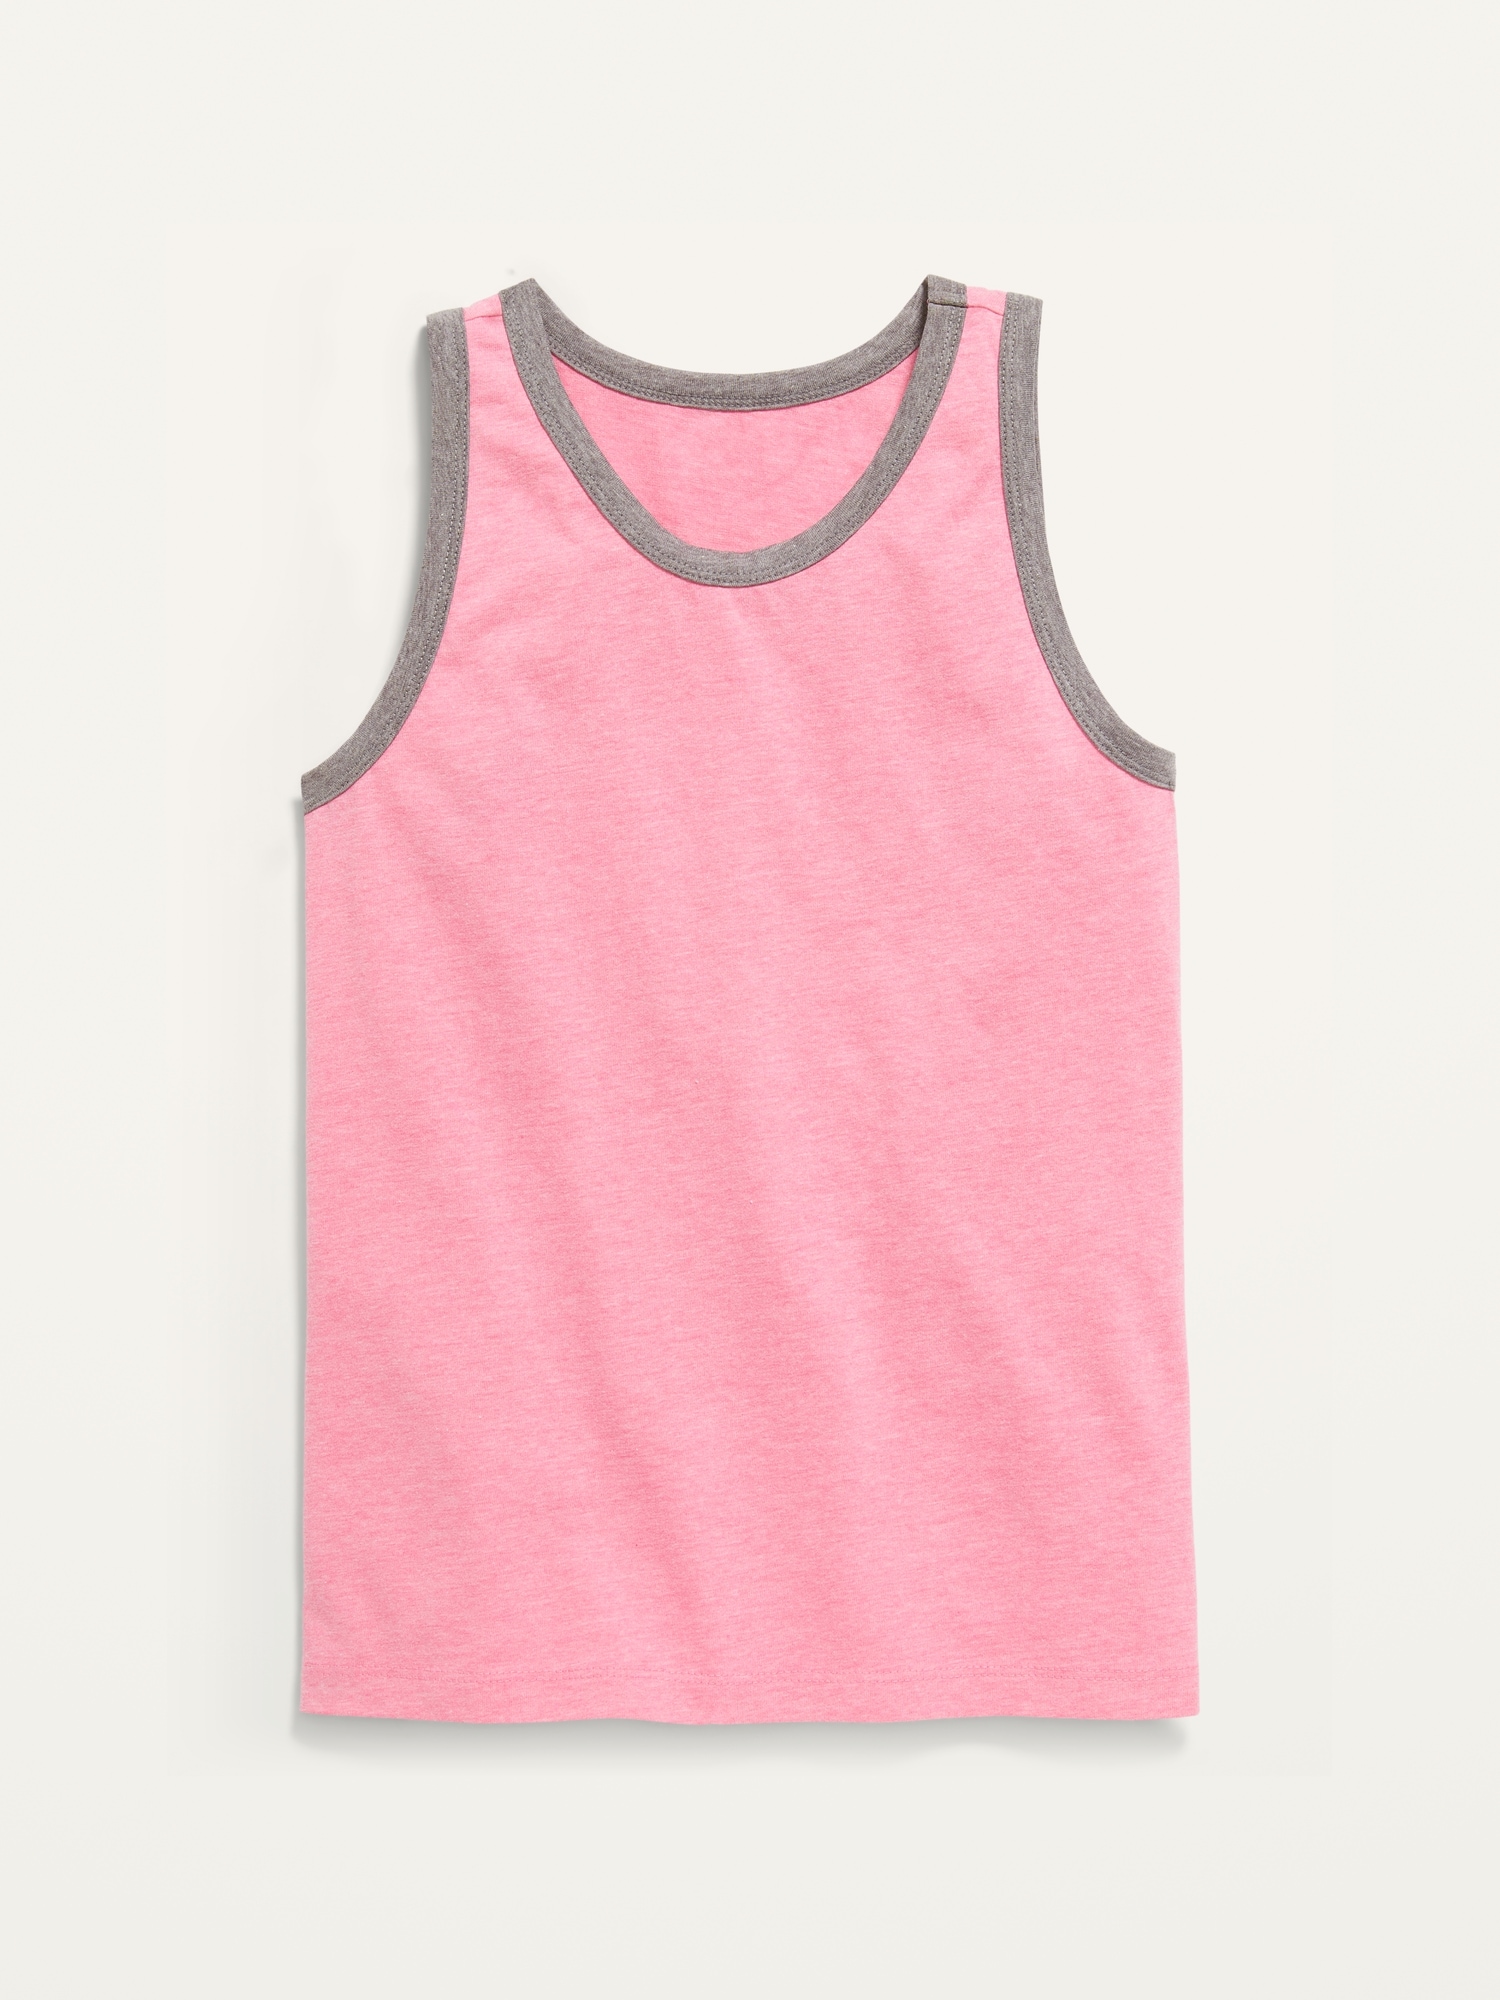 Old Navy Softest Tank Top for Boys pink. 1